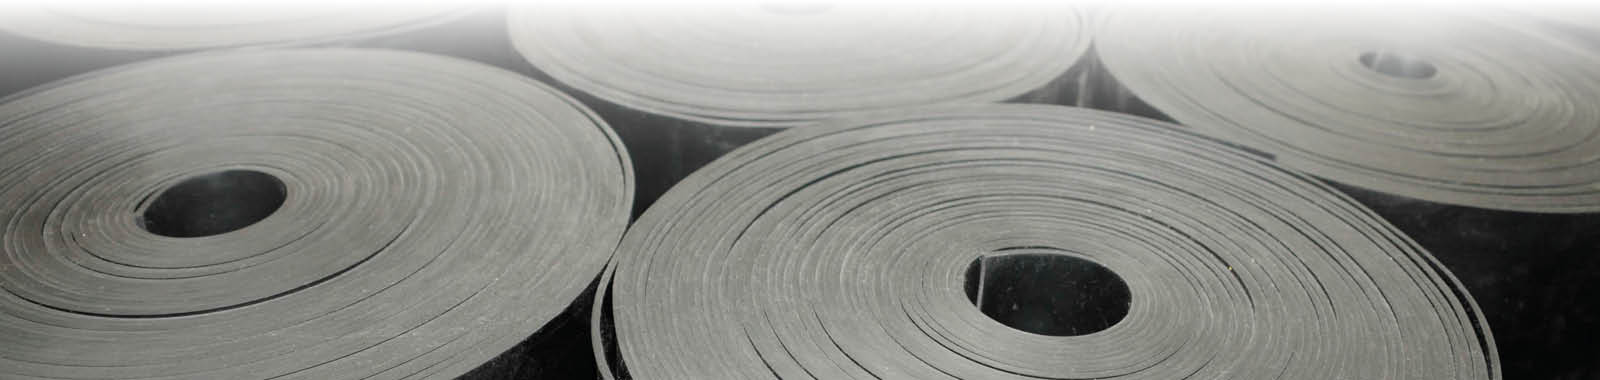 Rubber sheeting and rubber plates as gaskets, sealings, membranes and interposition